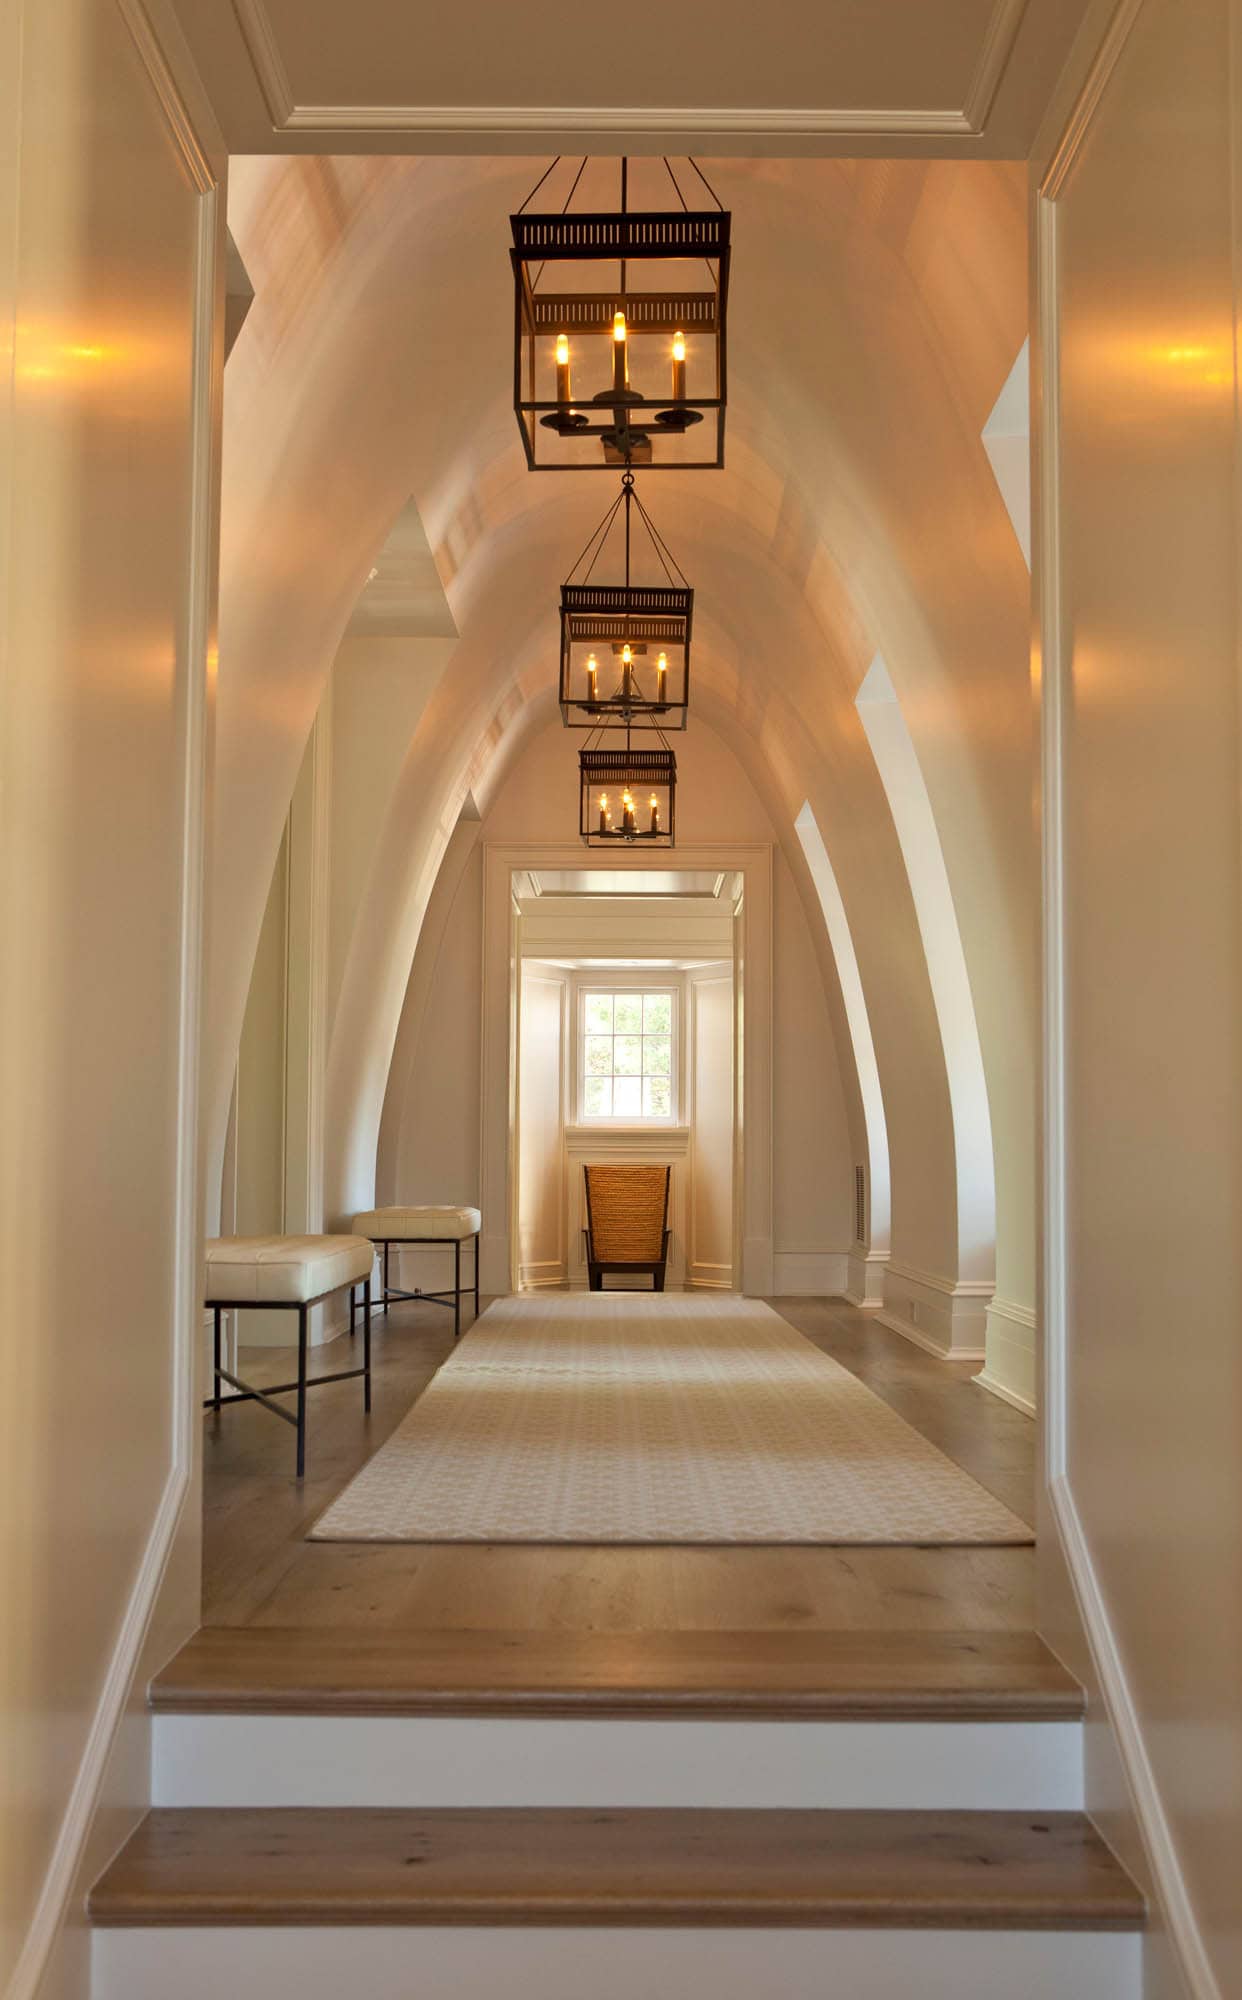 Hallway featuring arched walls in traditional style, featured in home tour